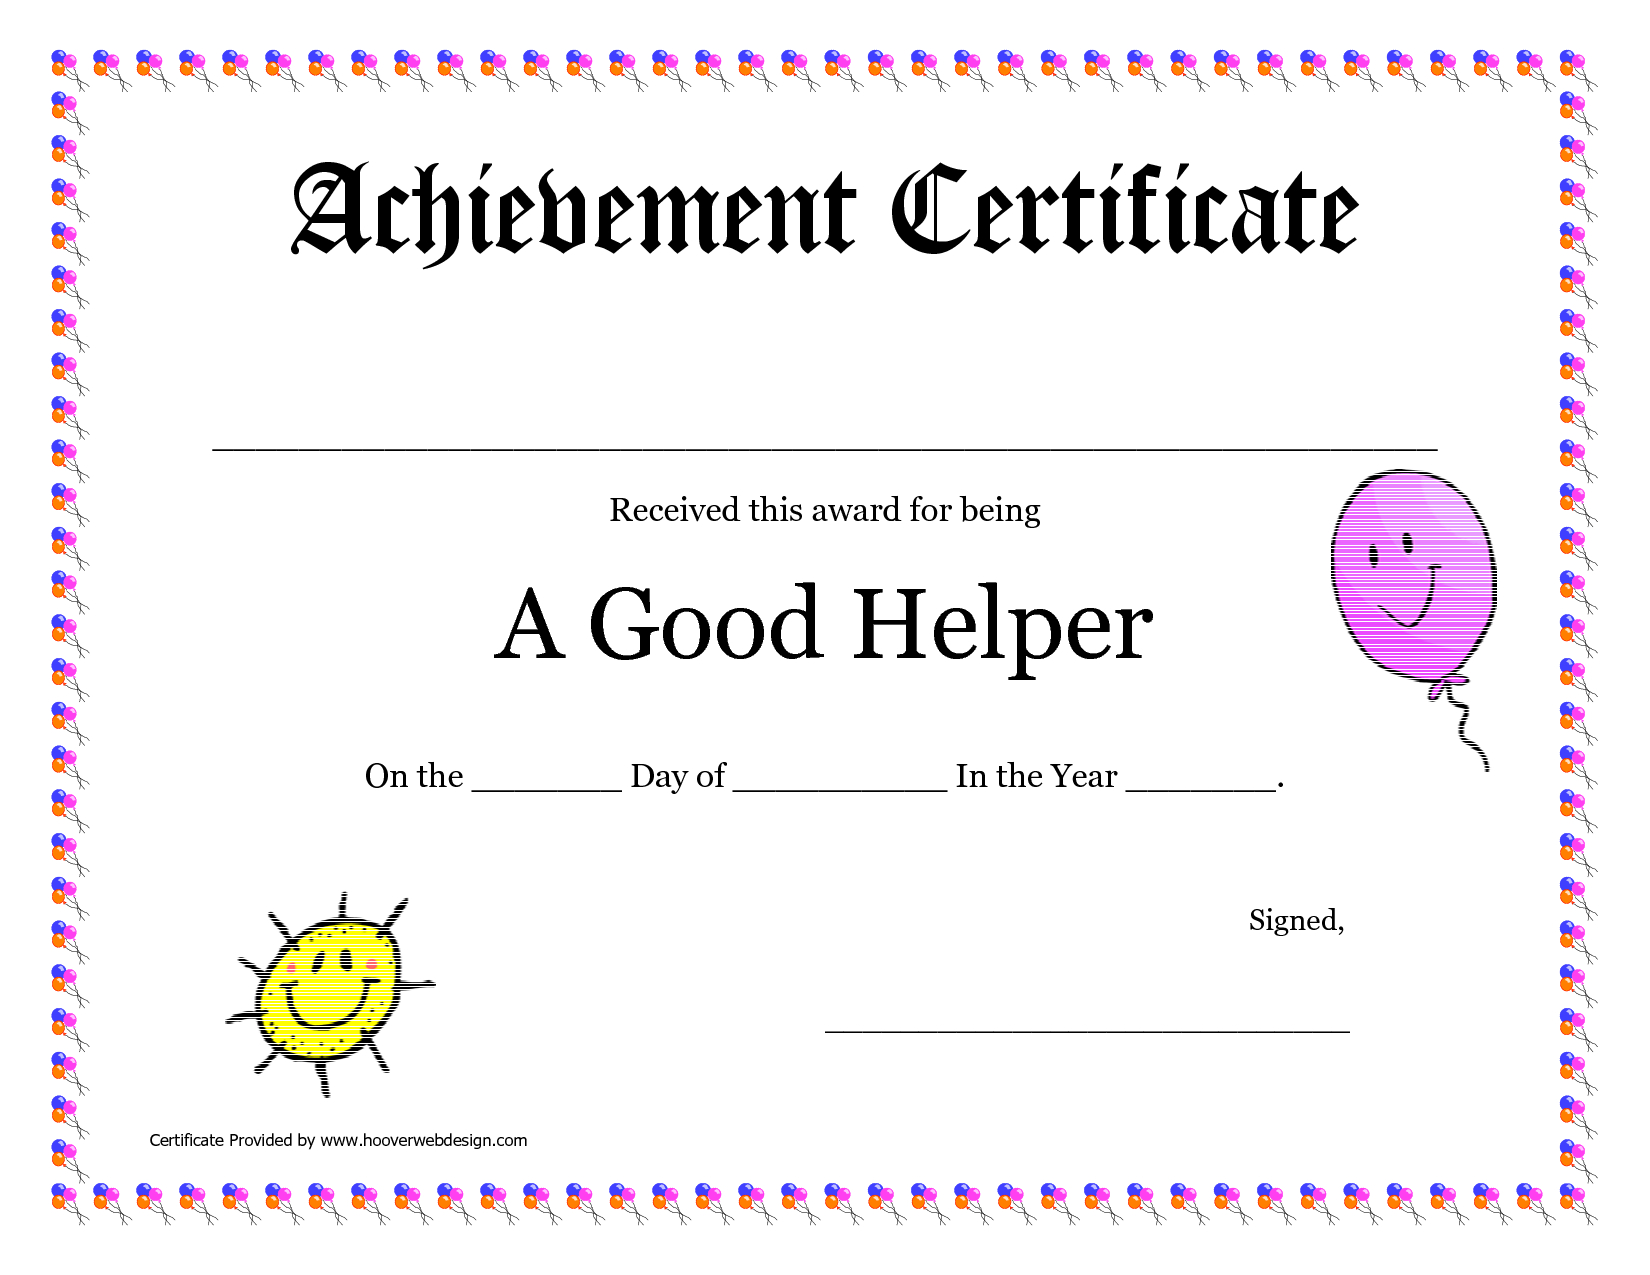 Printable Award Certificates For Teachers | Good Helper With Regard To Student Of The Year Award Certificate Templates